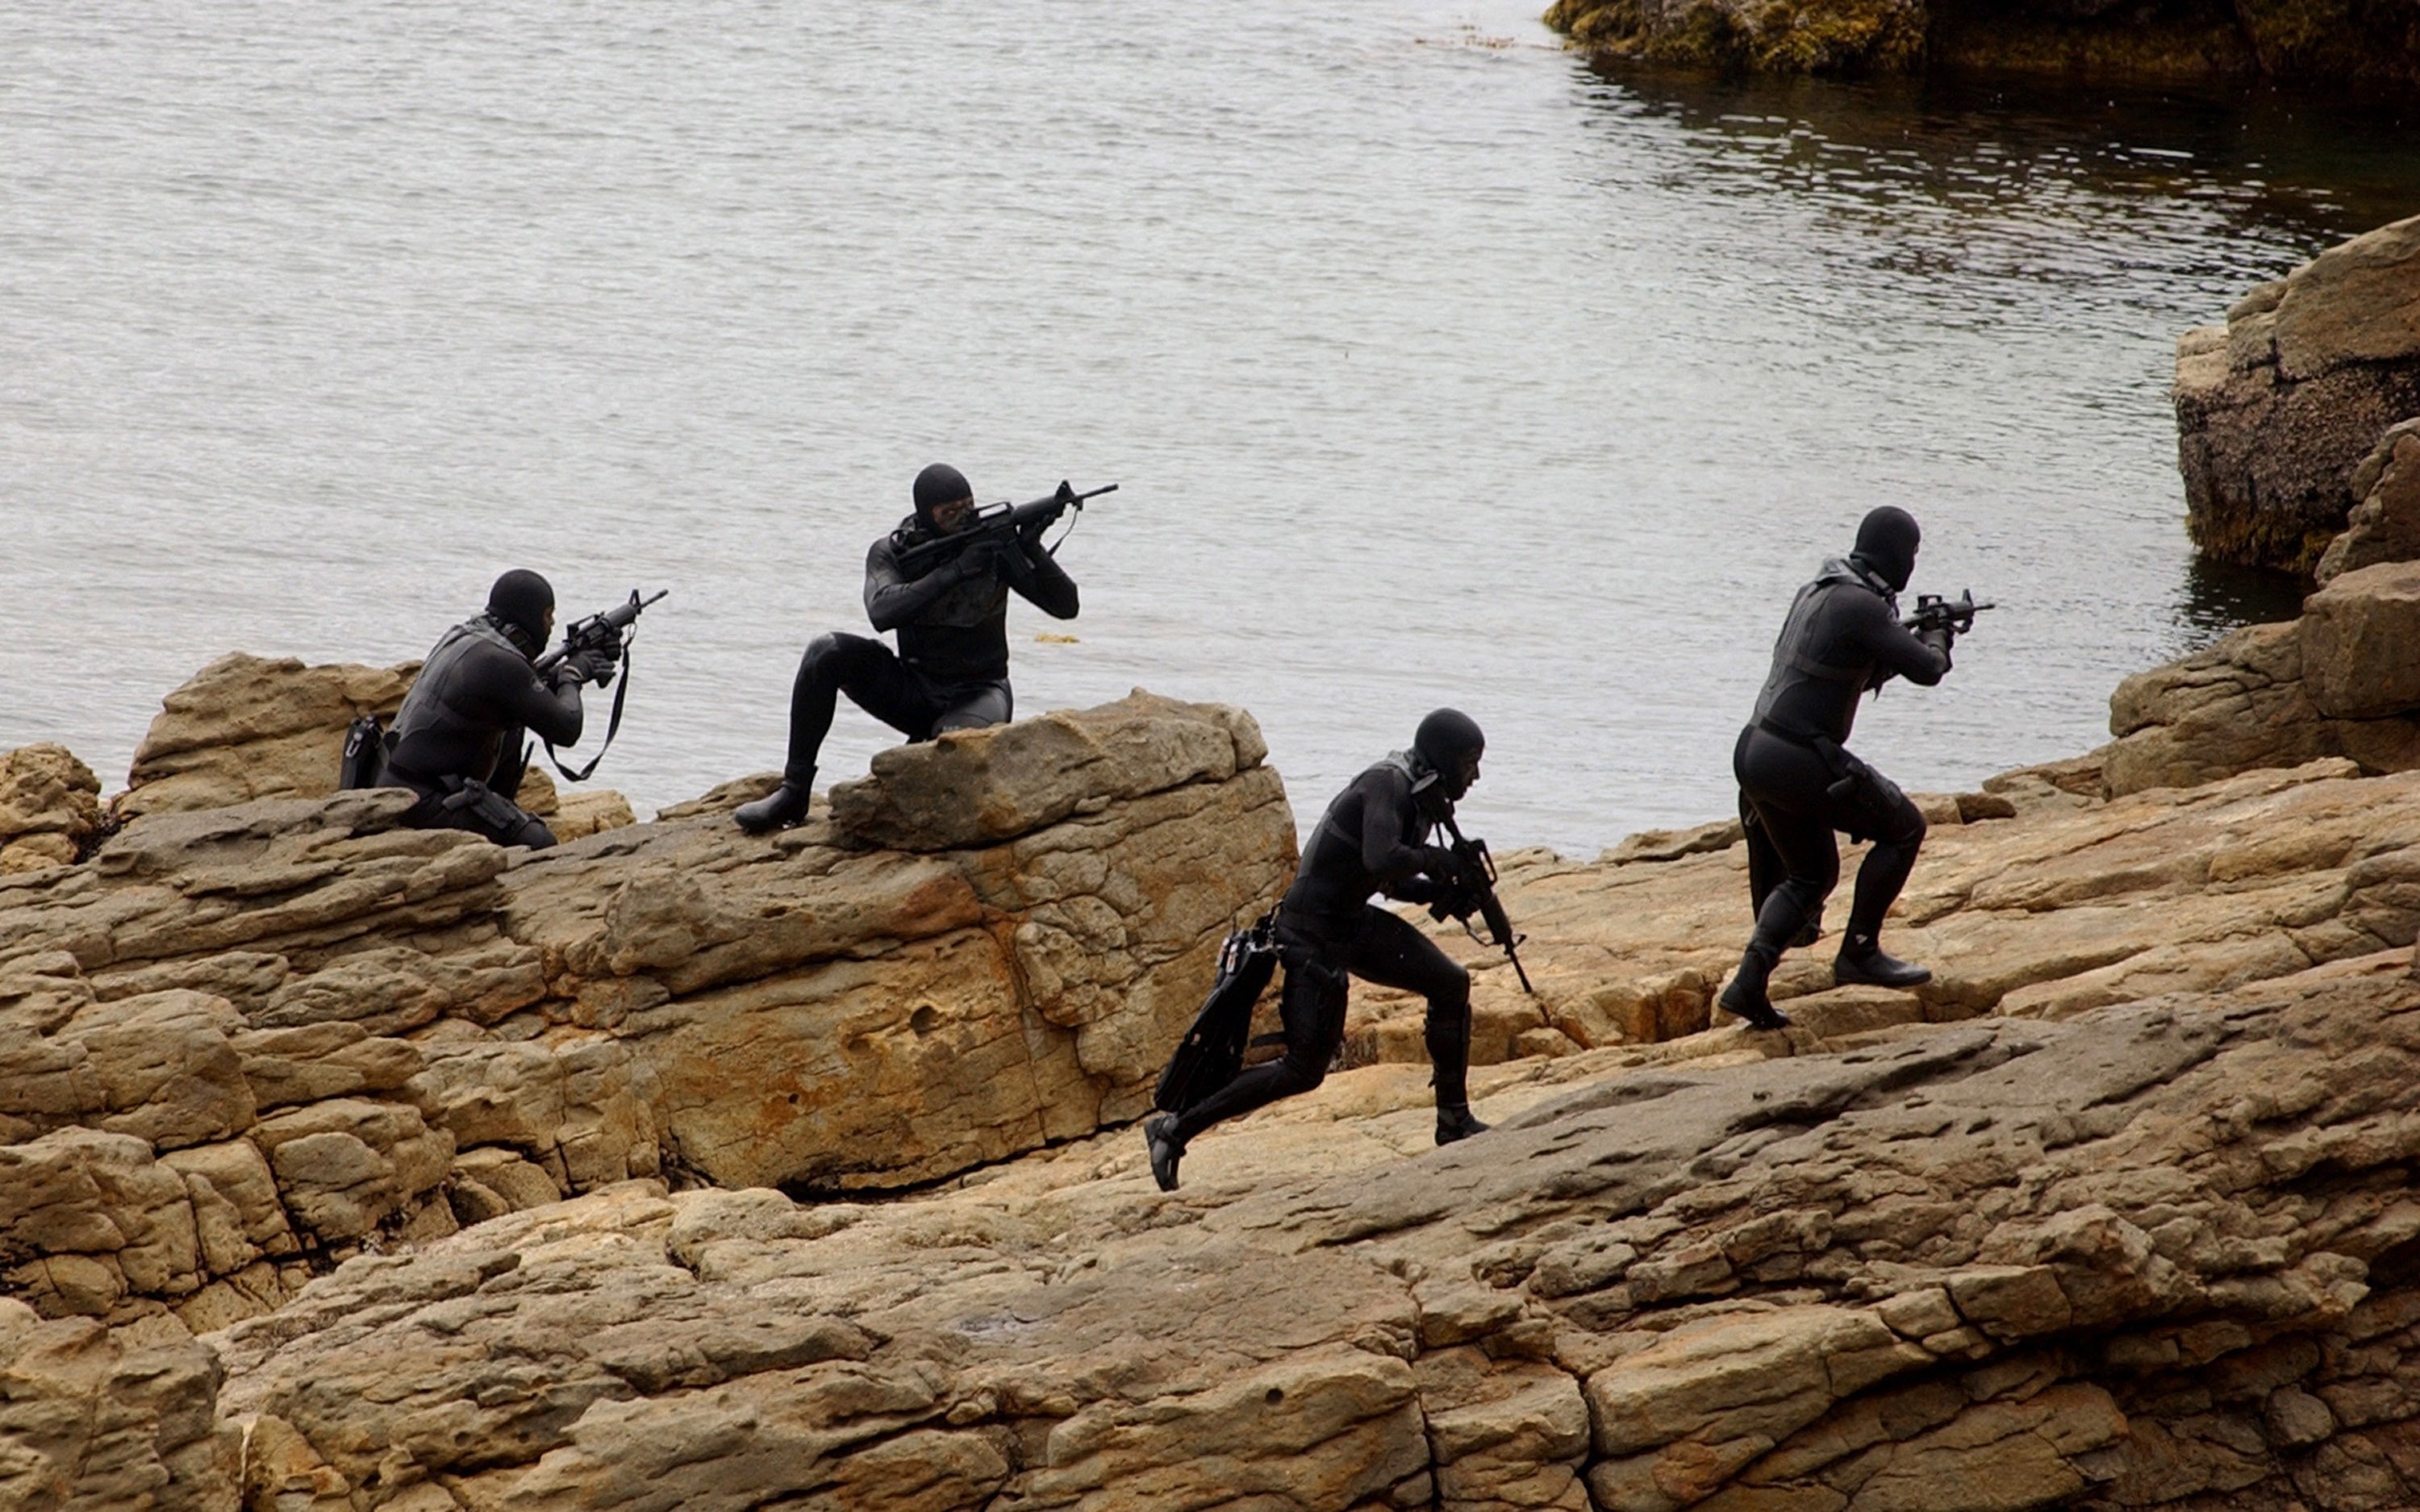 Navy SEALs practice Over The Beach evolutions during a training exercise on May 25, 2004 in a Remote Training Facility. (Getty Images)